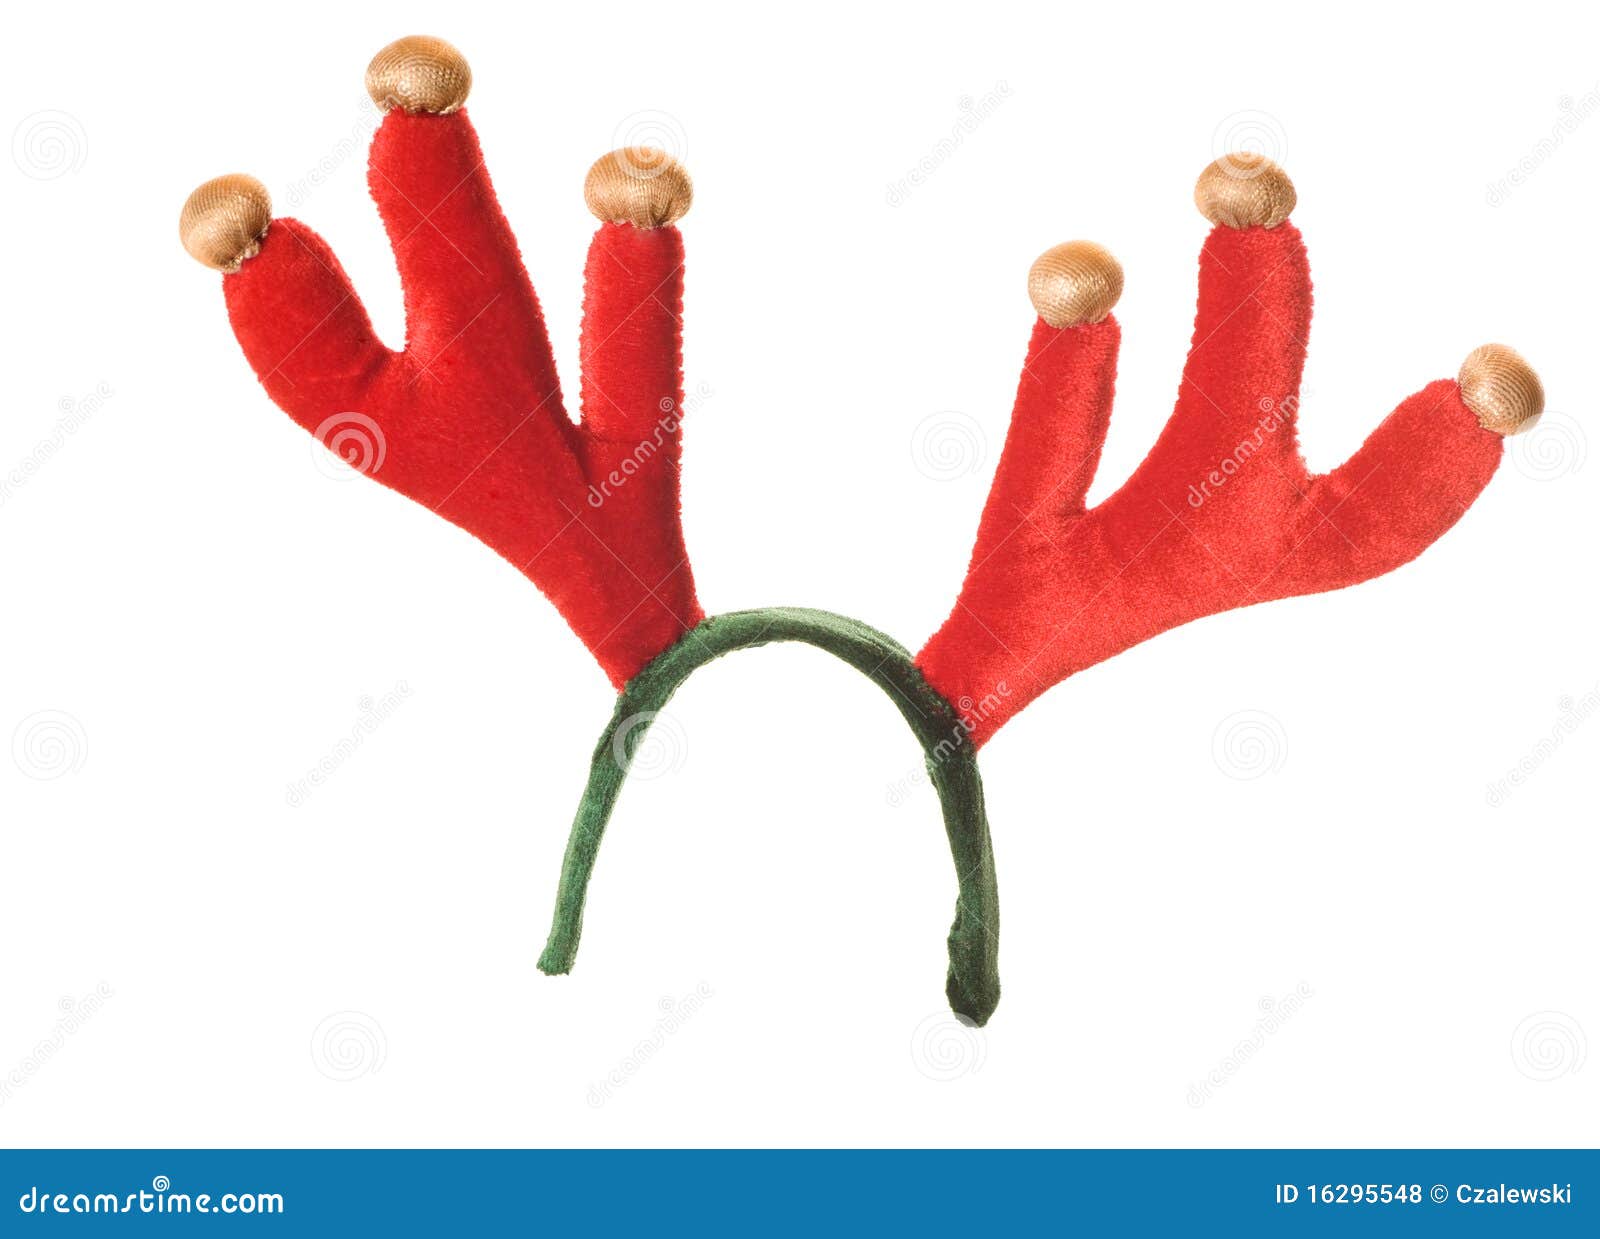 red and green christmas reindeer antlers